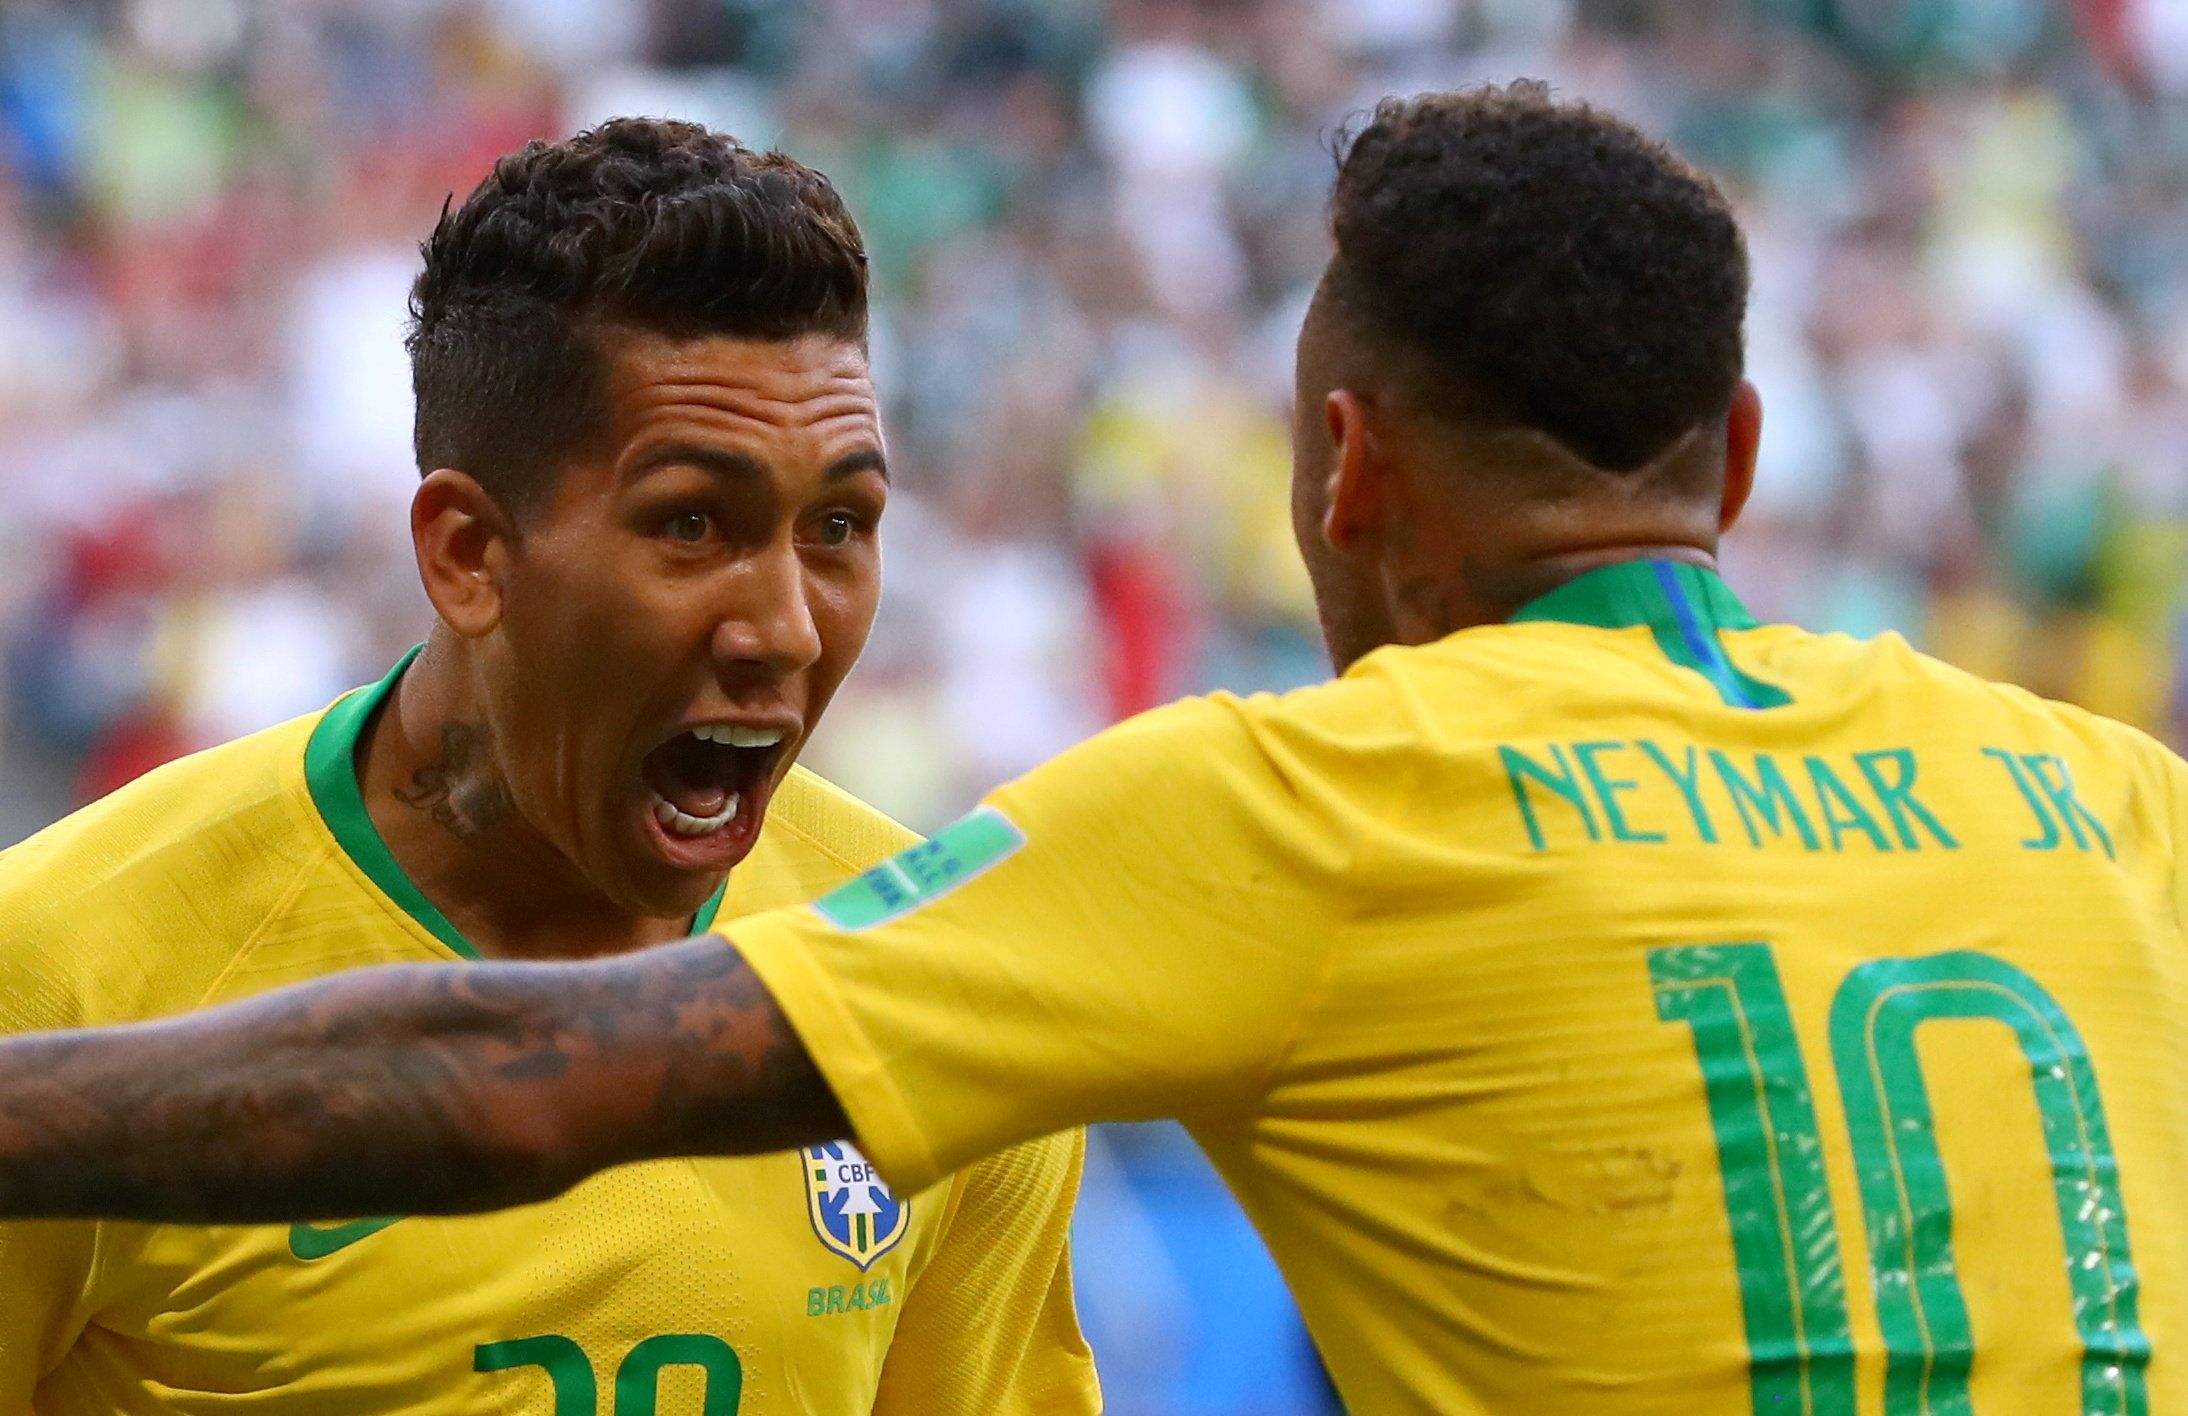 Soccer Football - World Cup - Round of 16 - Brazil vs Mexico - Samara Arena, Samara, Russia - July 2, 2018  Brazil's Roberto Firmino celebrates scoring their second goal with Neymar                    REUTERS/Michael Dalder     TPX IMAGES OF THE DAY